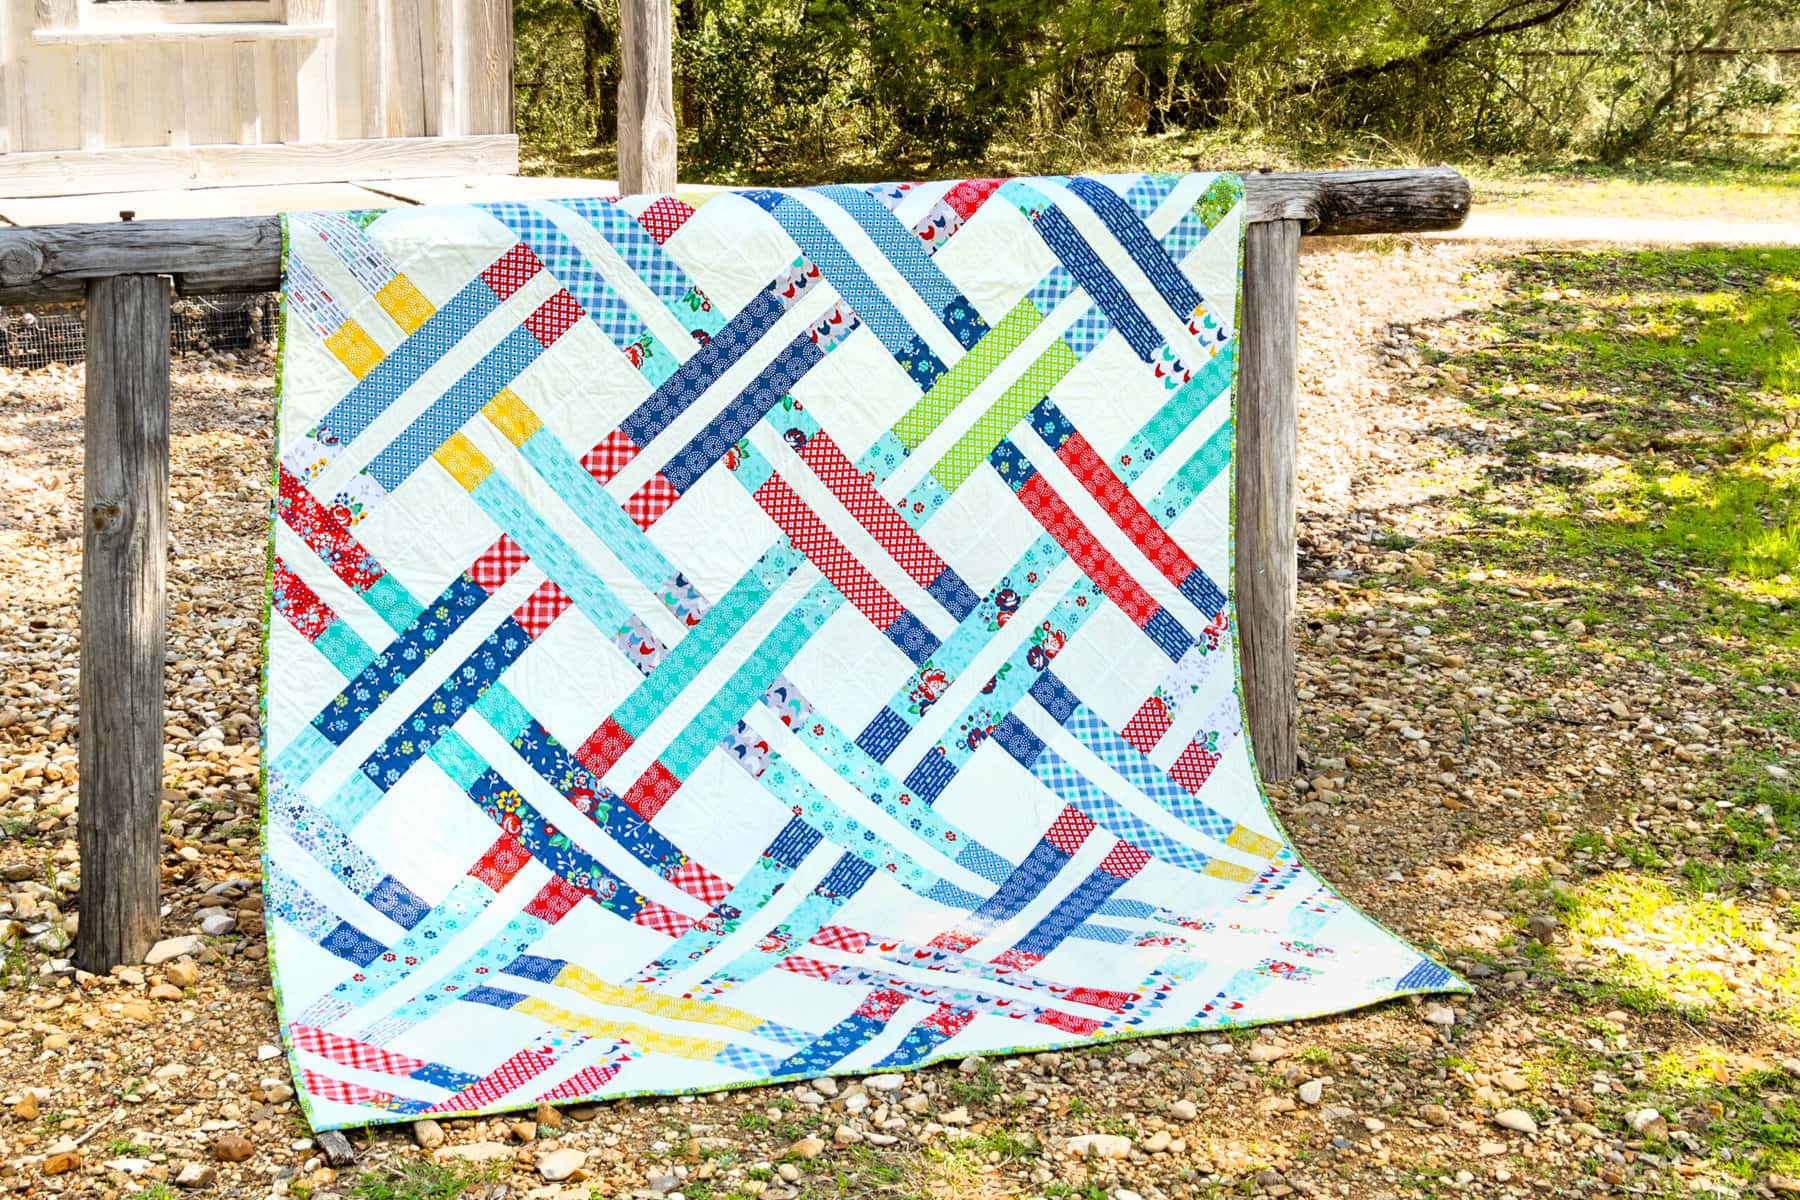 Cluck Cluck Sew's jelly Weave Quilt Pattern comes in a variety of sizes and is great to make colorful baby quilts